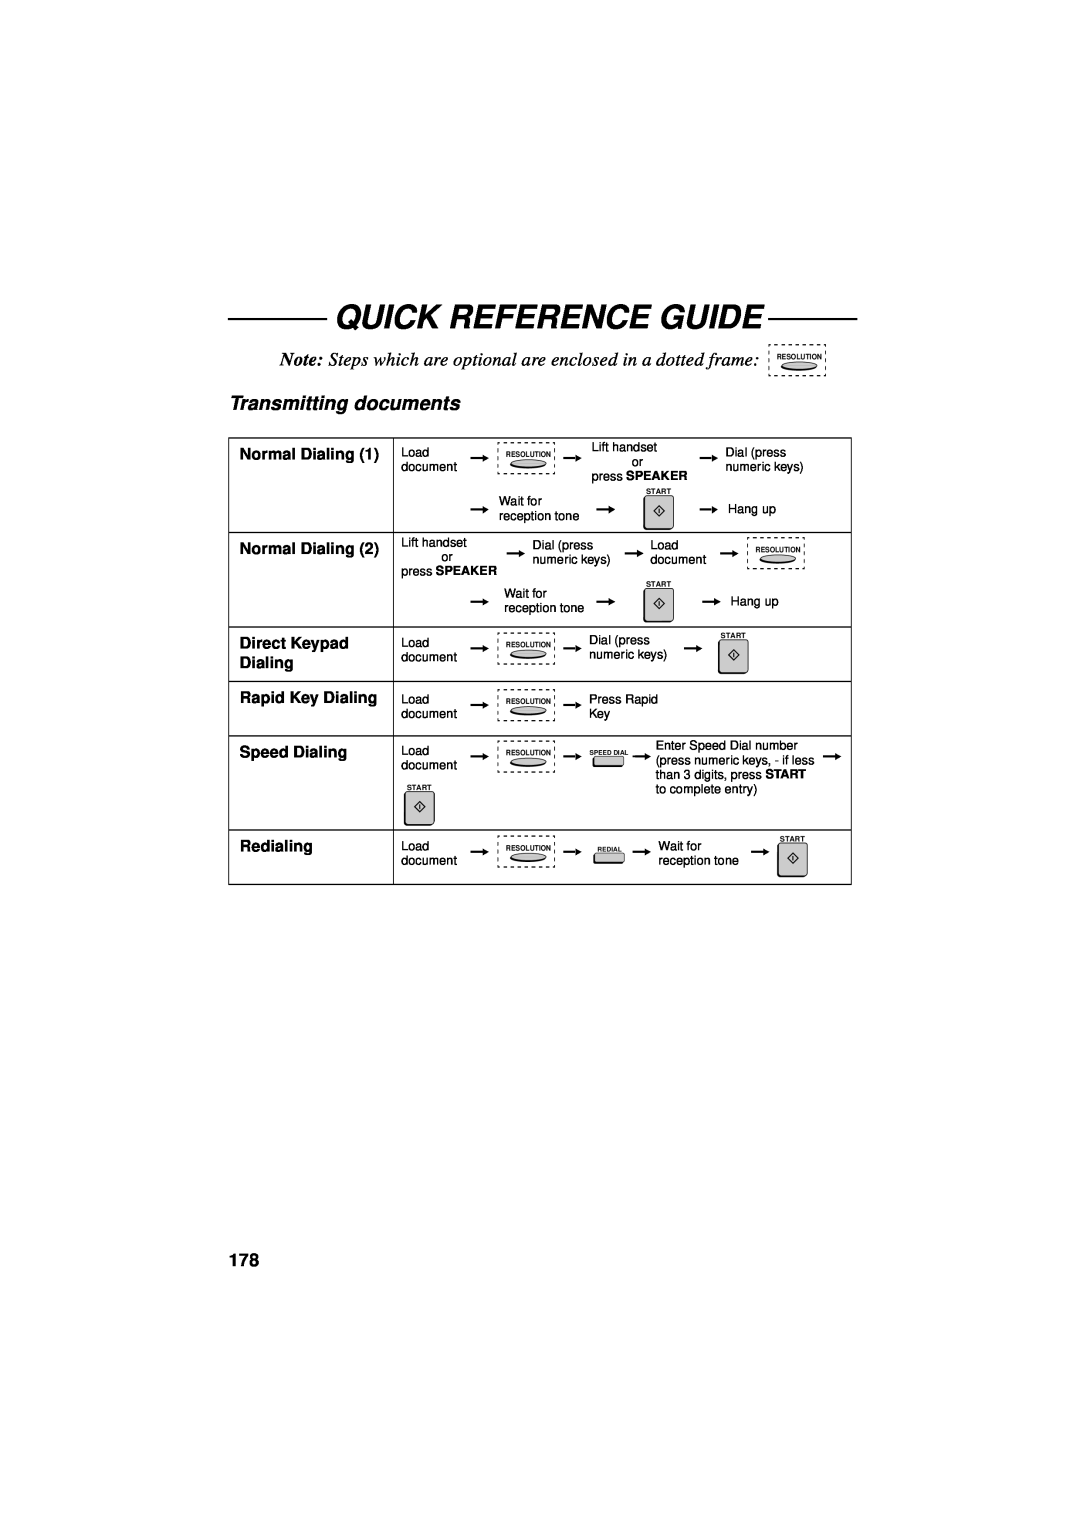 Sharp FO-5700 Quick Reference Guide, Transmitting documents, Normal Dialing, Direct Keypad, Rapid Key Dialing, Redialing 